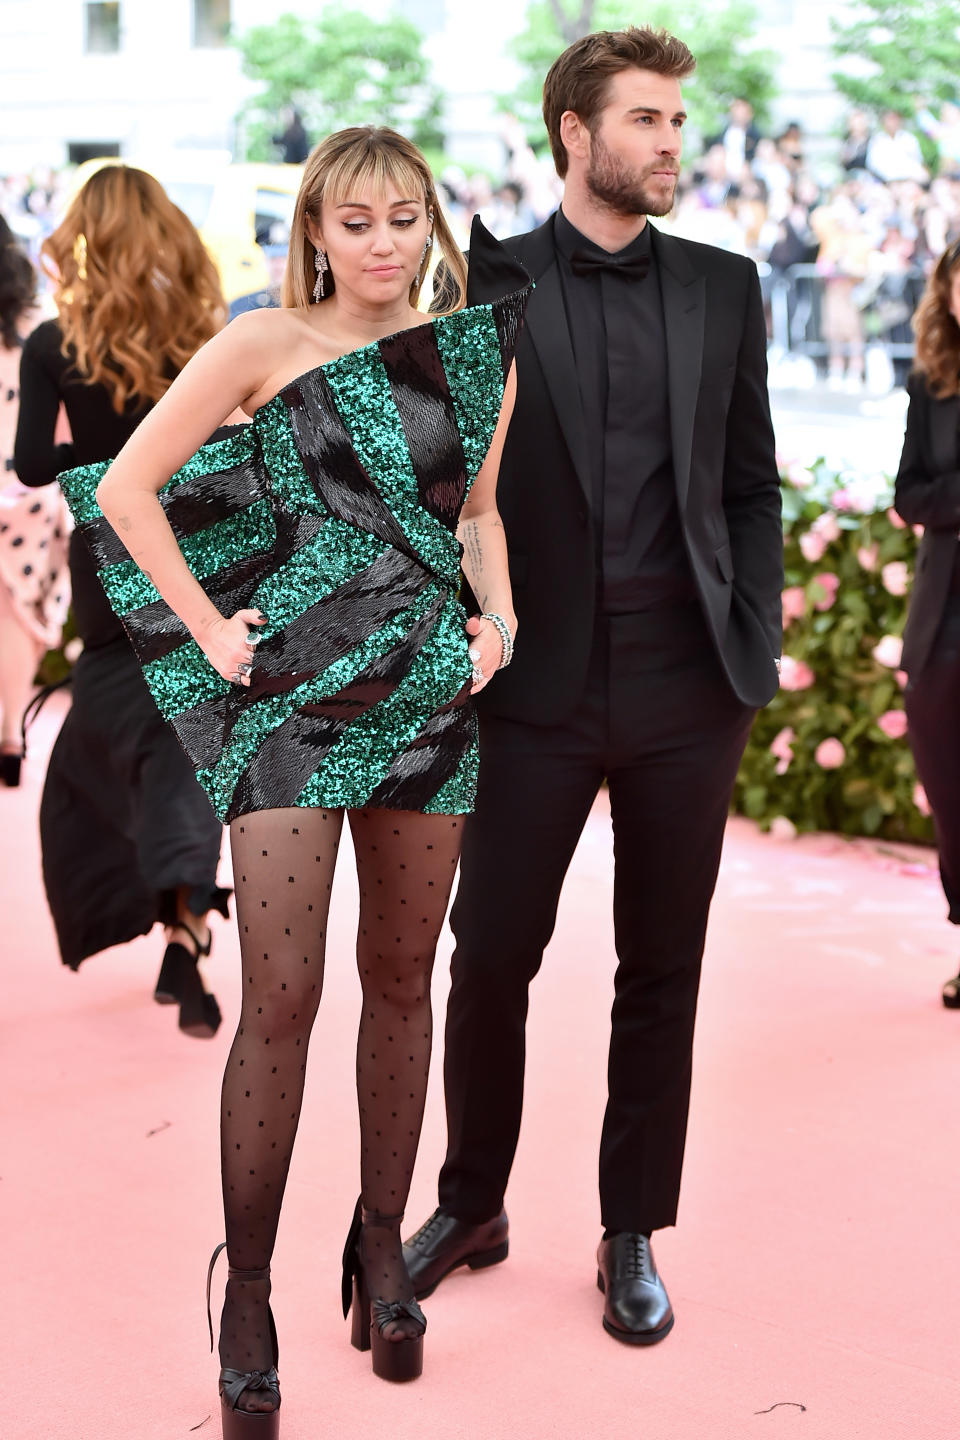 A photo of Miley Cyrus and Liam Hemsworth on the Met Gala red carpet in May 2019.